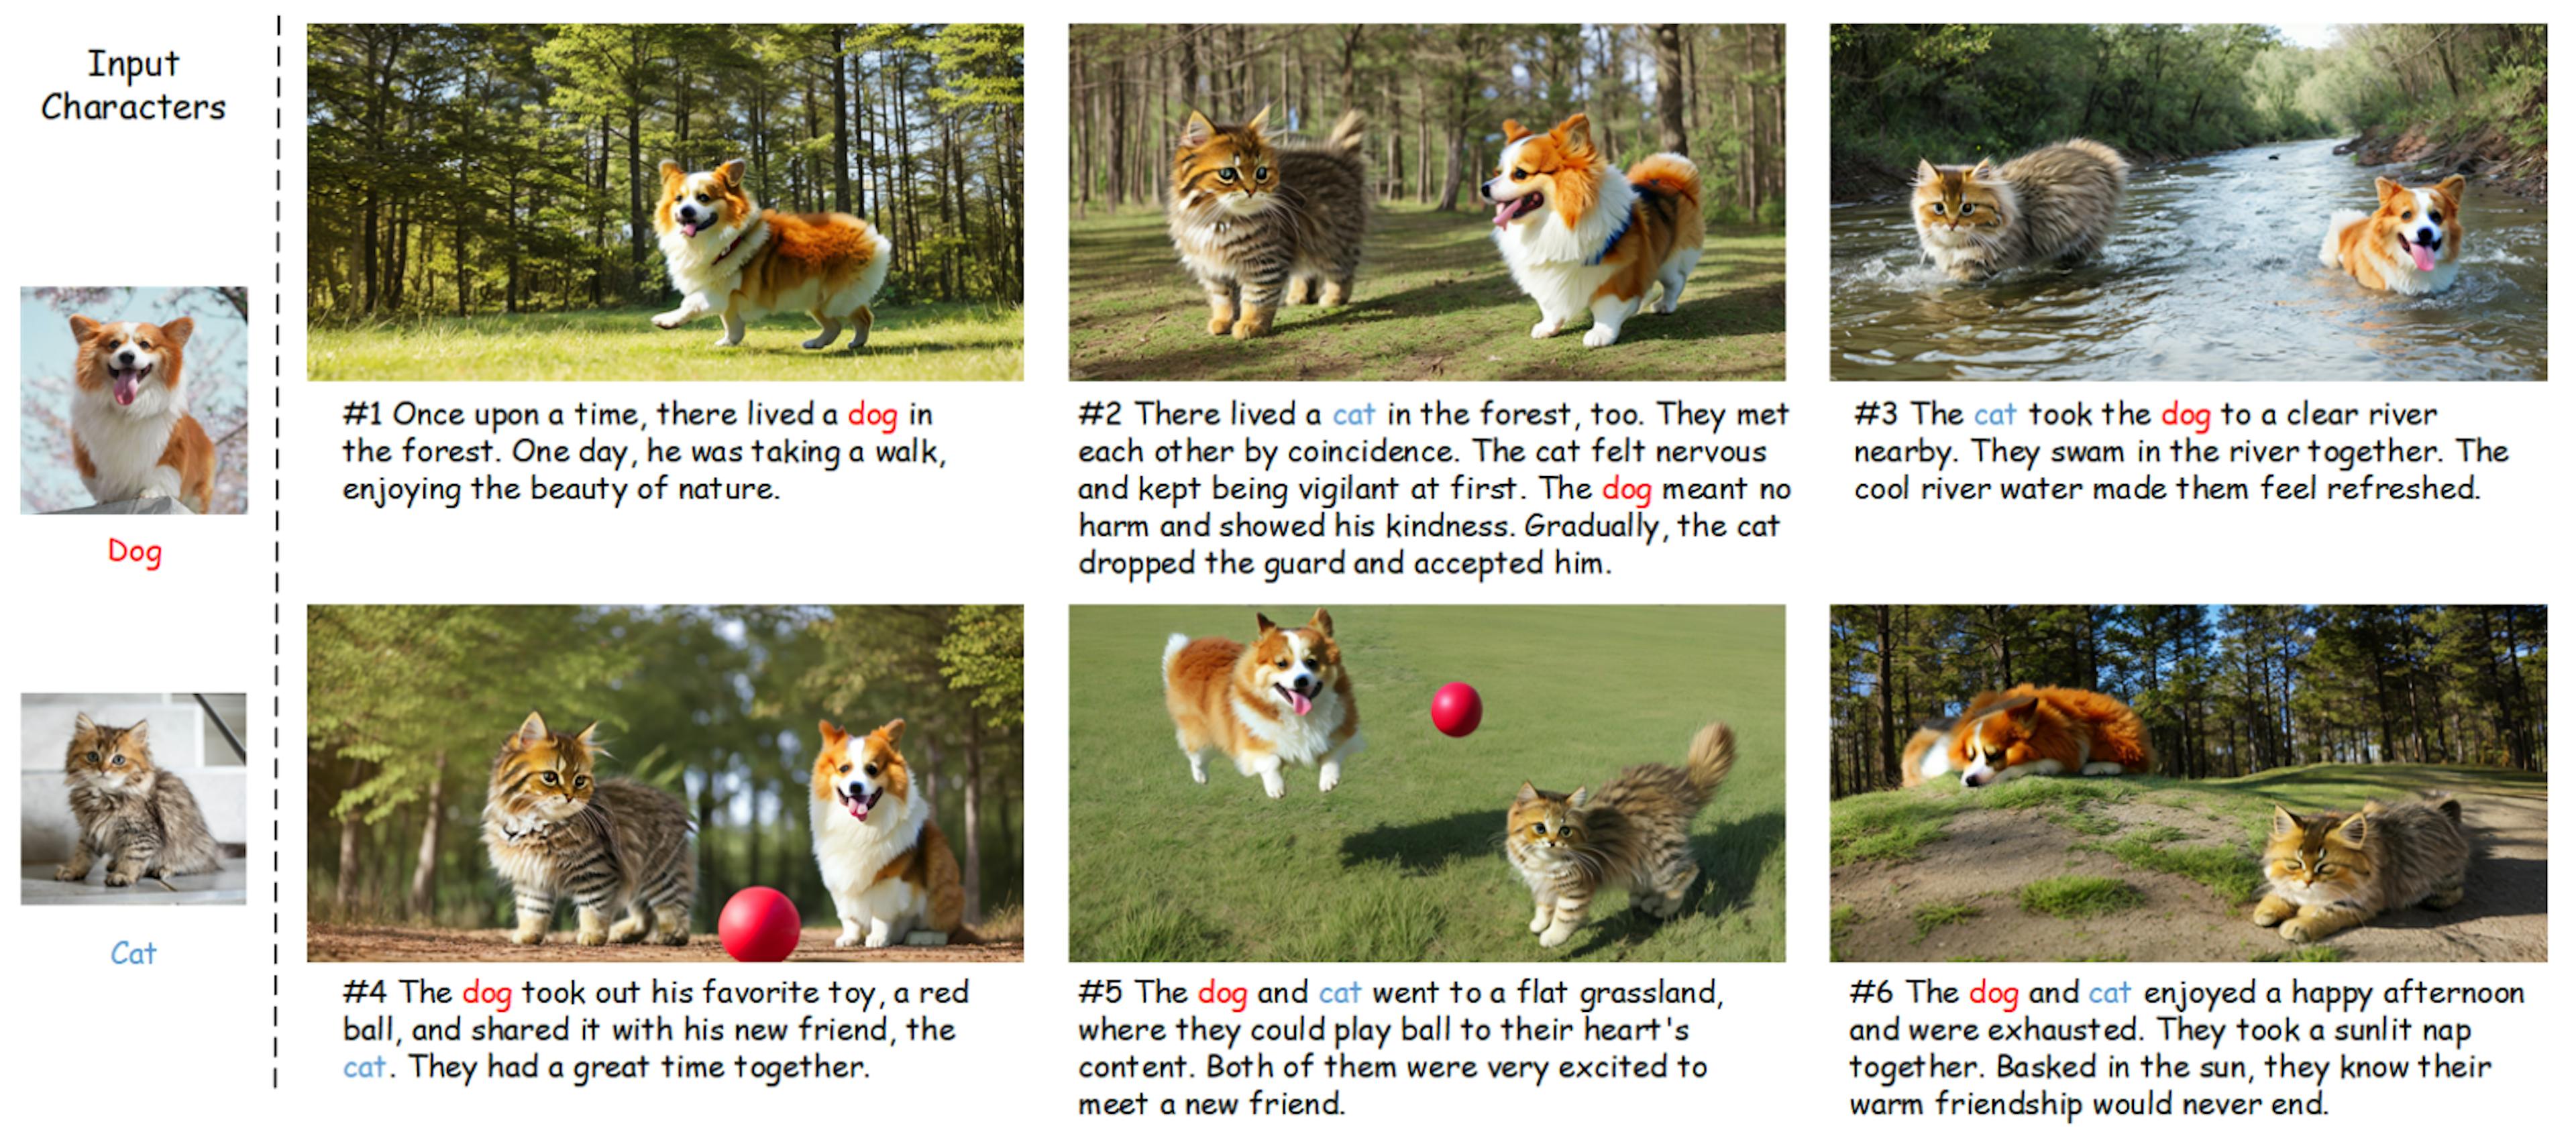 Figure 1: Example storytelling images generated by our method AutoStory. We can generate text-aligned, identity-consistent, and high-quality story images from user-input stories and characters (the dog and cat on the left, specified by about 5 images per character), without additional inputs like sketches [Gong et al. 2023]. Further, our method also supports generating storytelling images from only text inputs, as shown in our experiments.